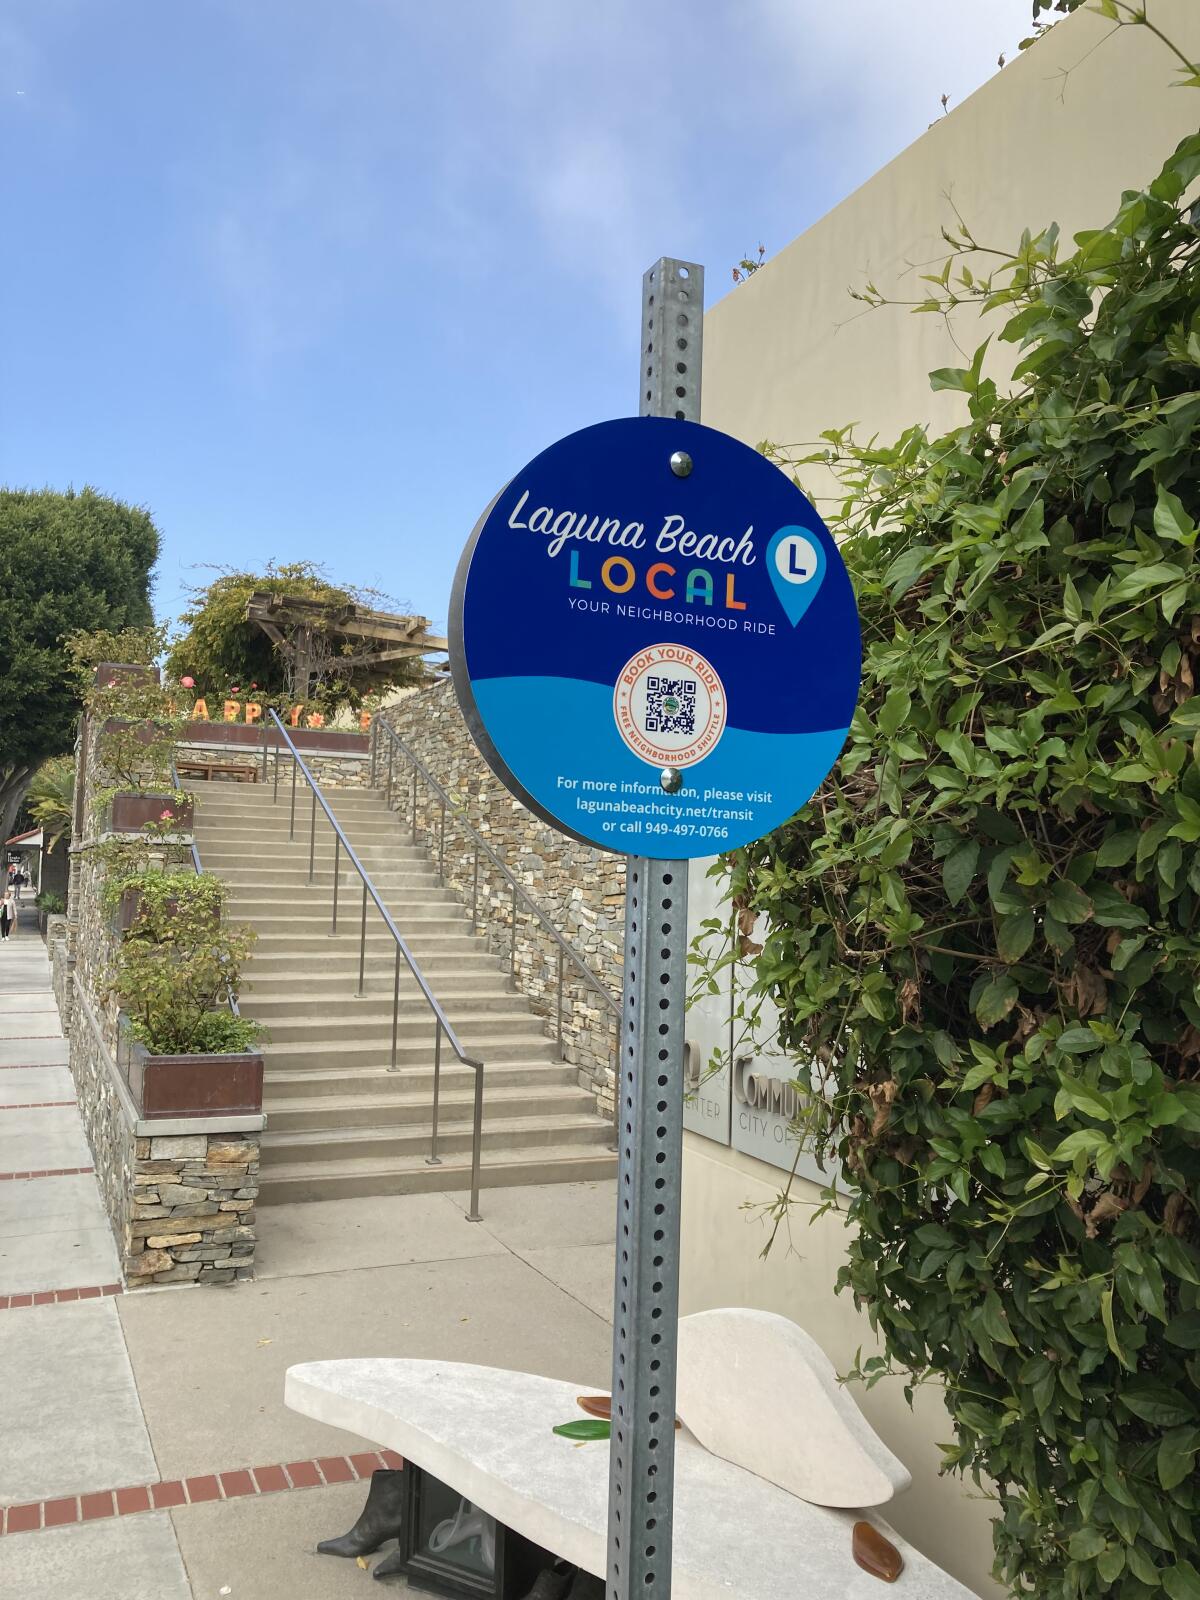 A sign put up for the 'Laguna Beach Local' on-demand transit system.